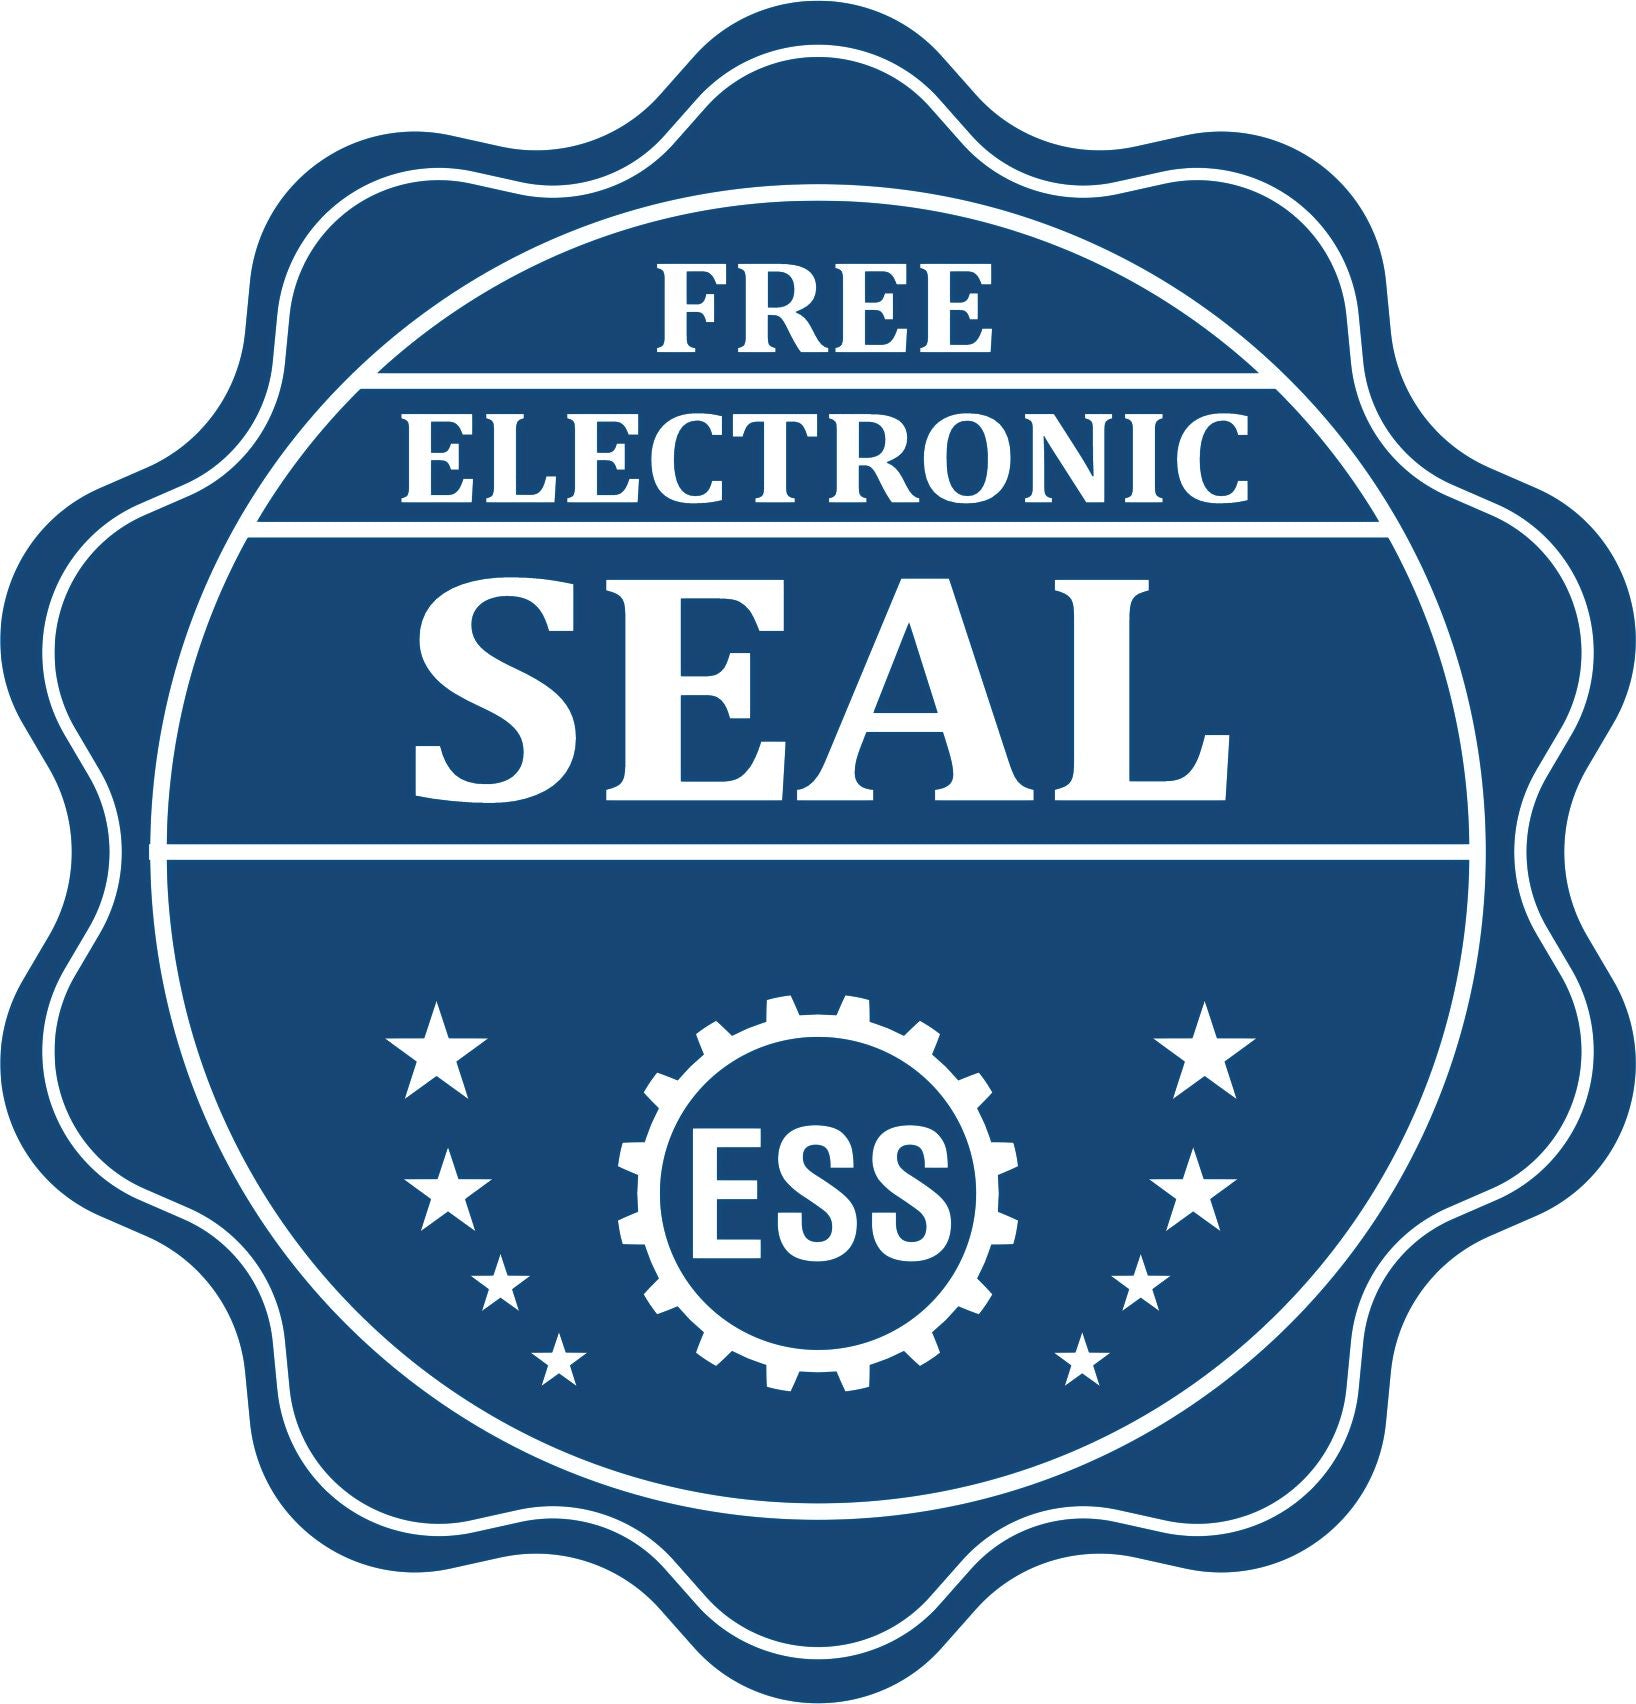 A badge showing a free electronic seal for the Heavy Duty Cast Iron Minnesota Land Surveyor Seal Embosser with stars and the ESS gear on the emblem.